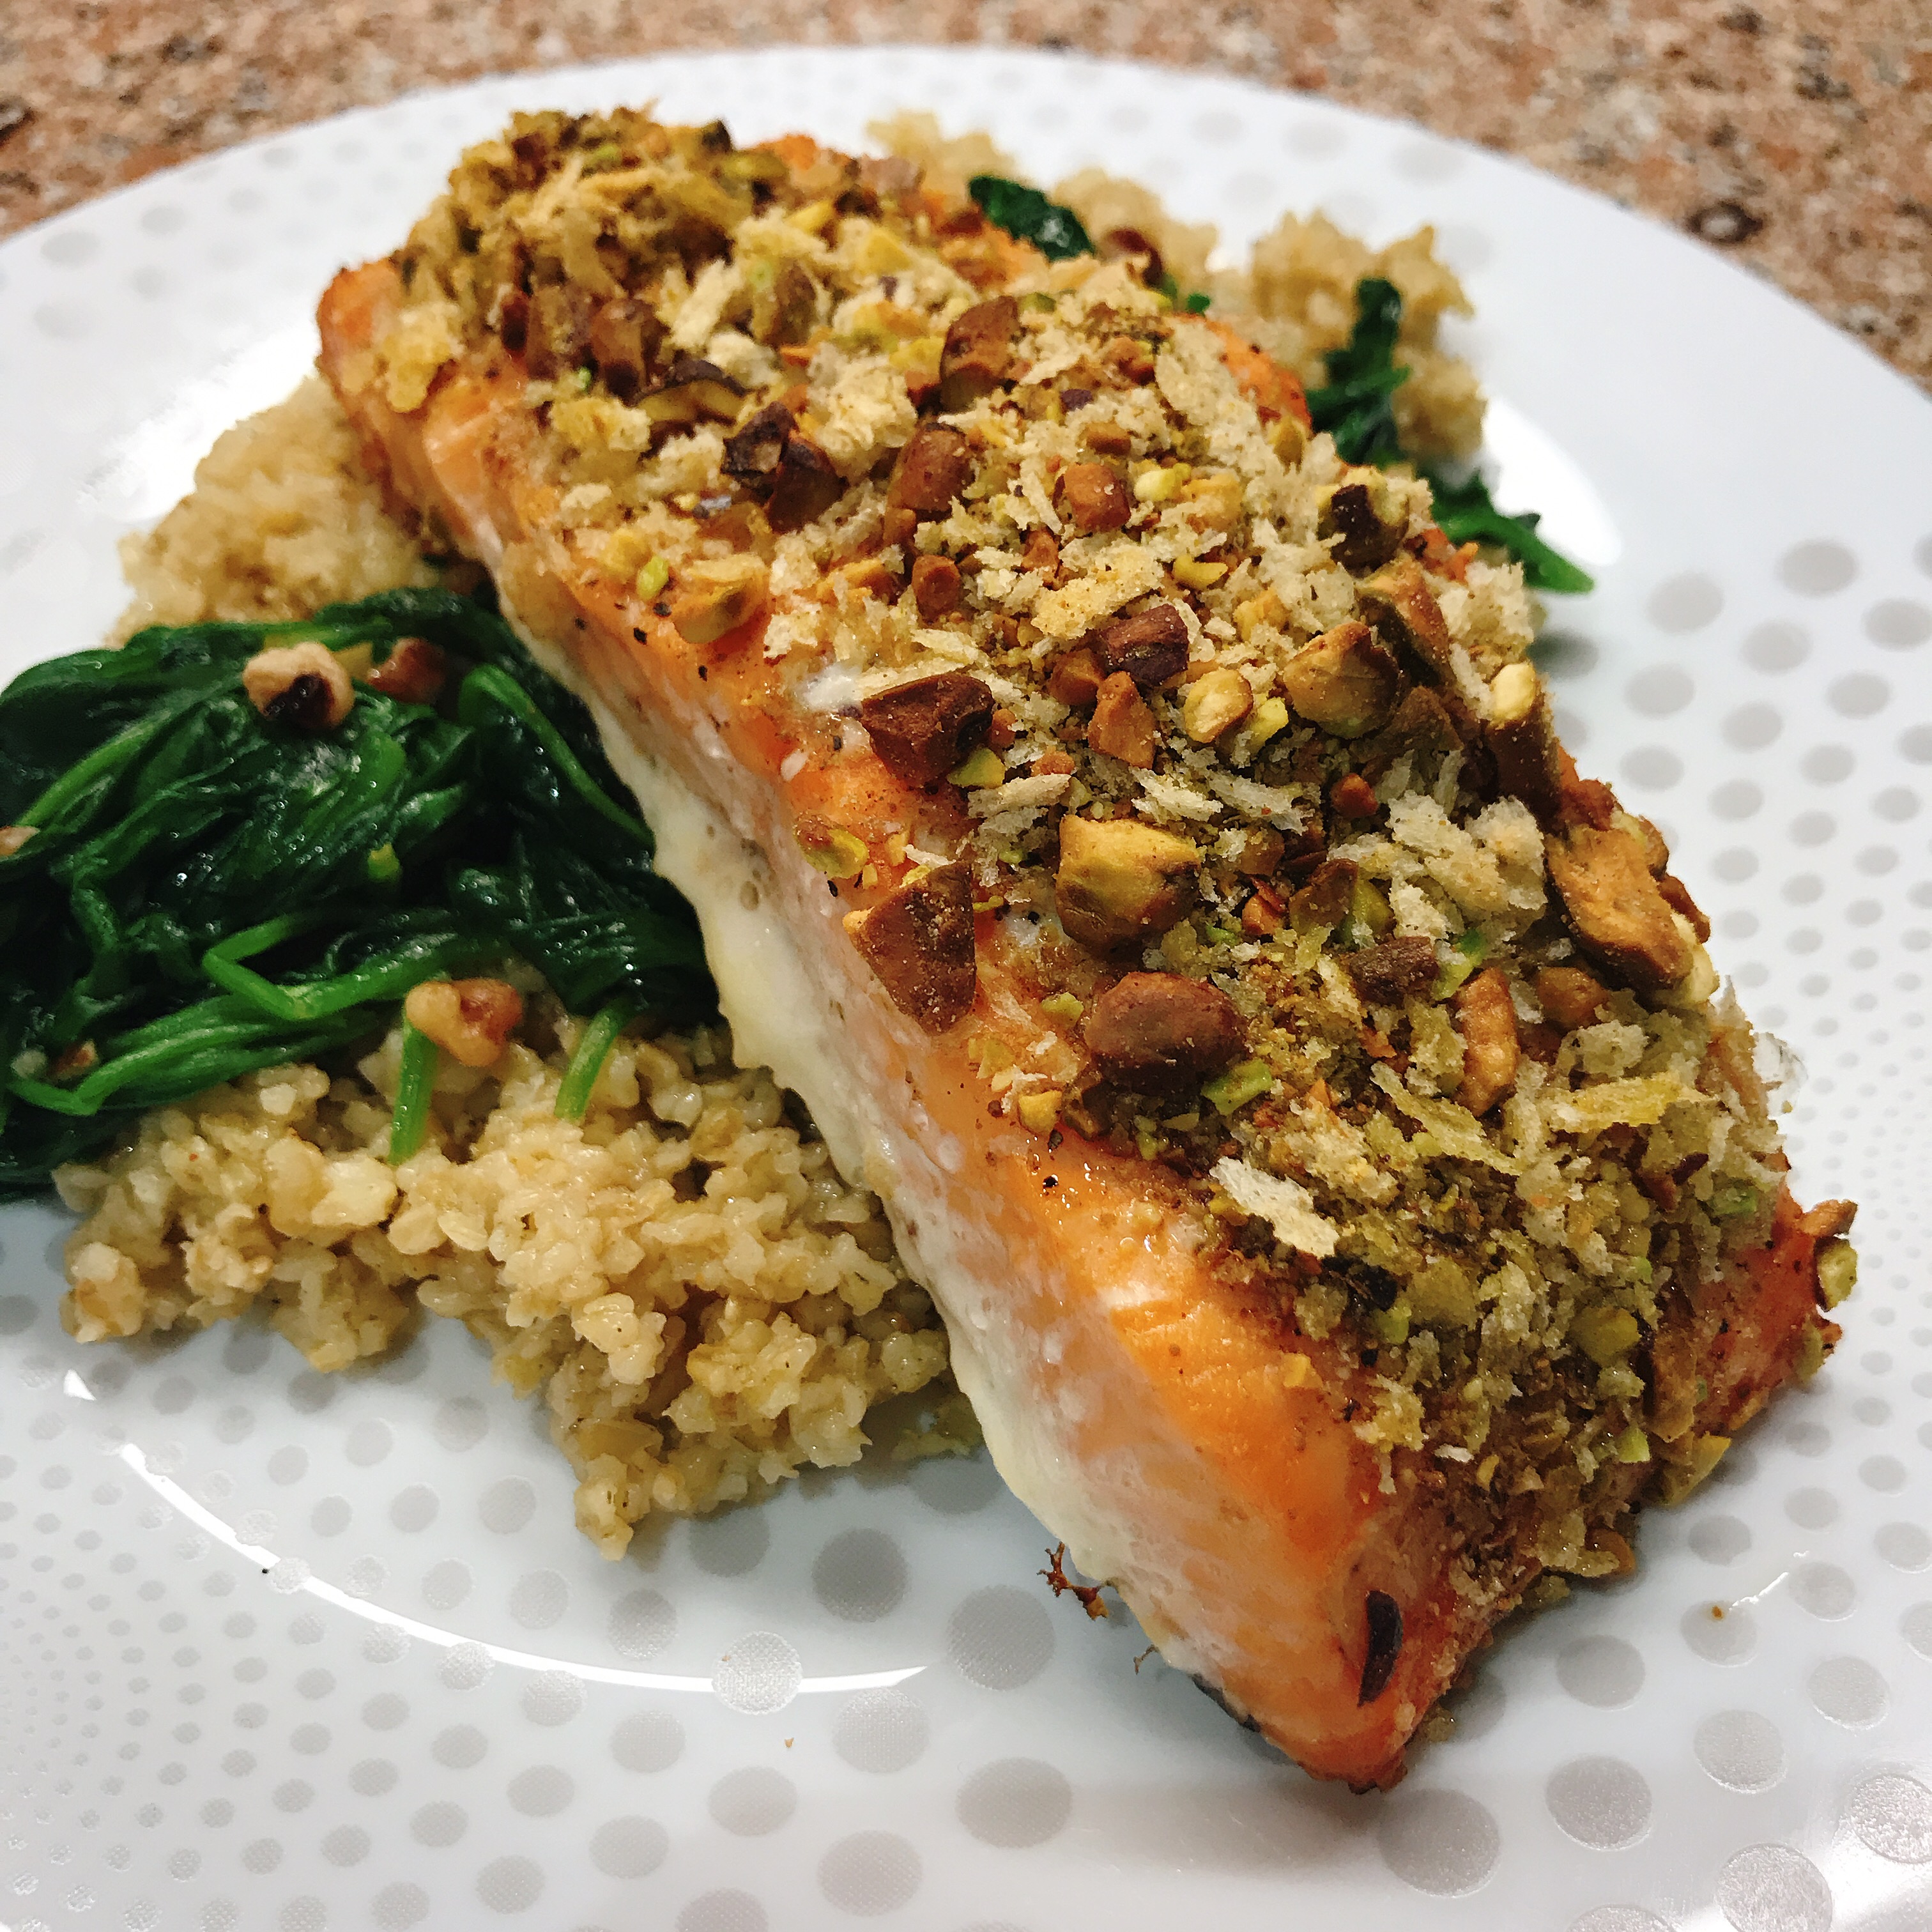 Oven-Roasted Pistachio-Crusted Salmon